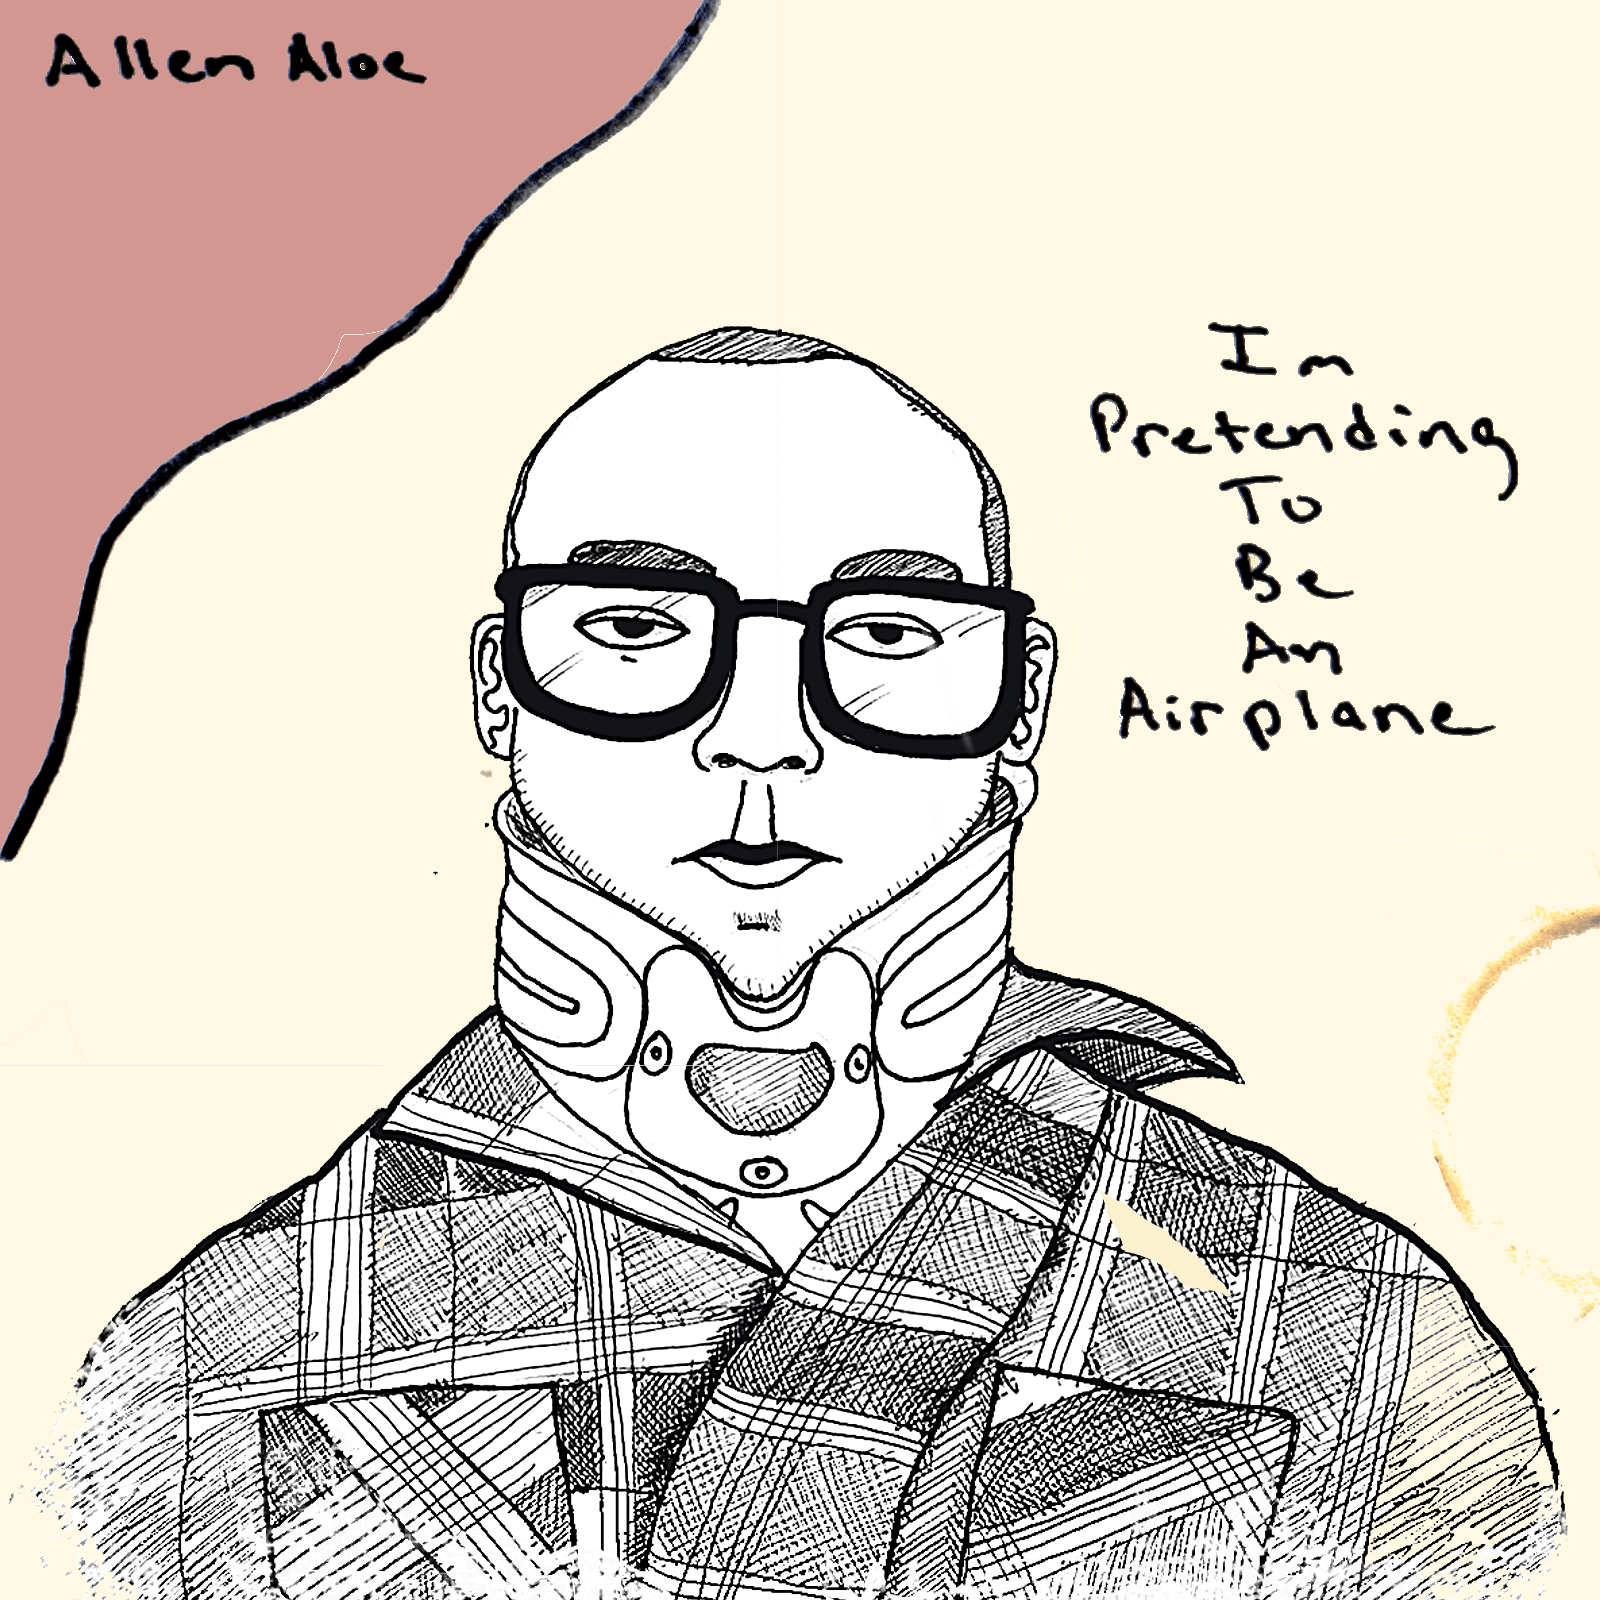 New EP By Allen Aloe - I'm Pretending To Be An Airplane (Premiere)